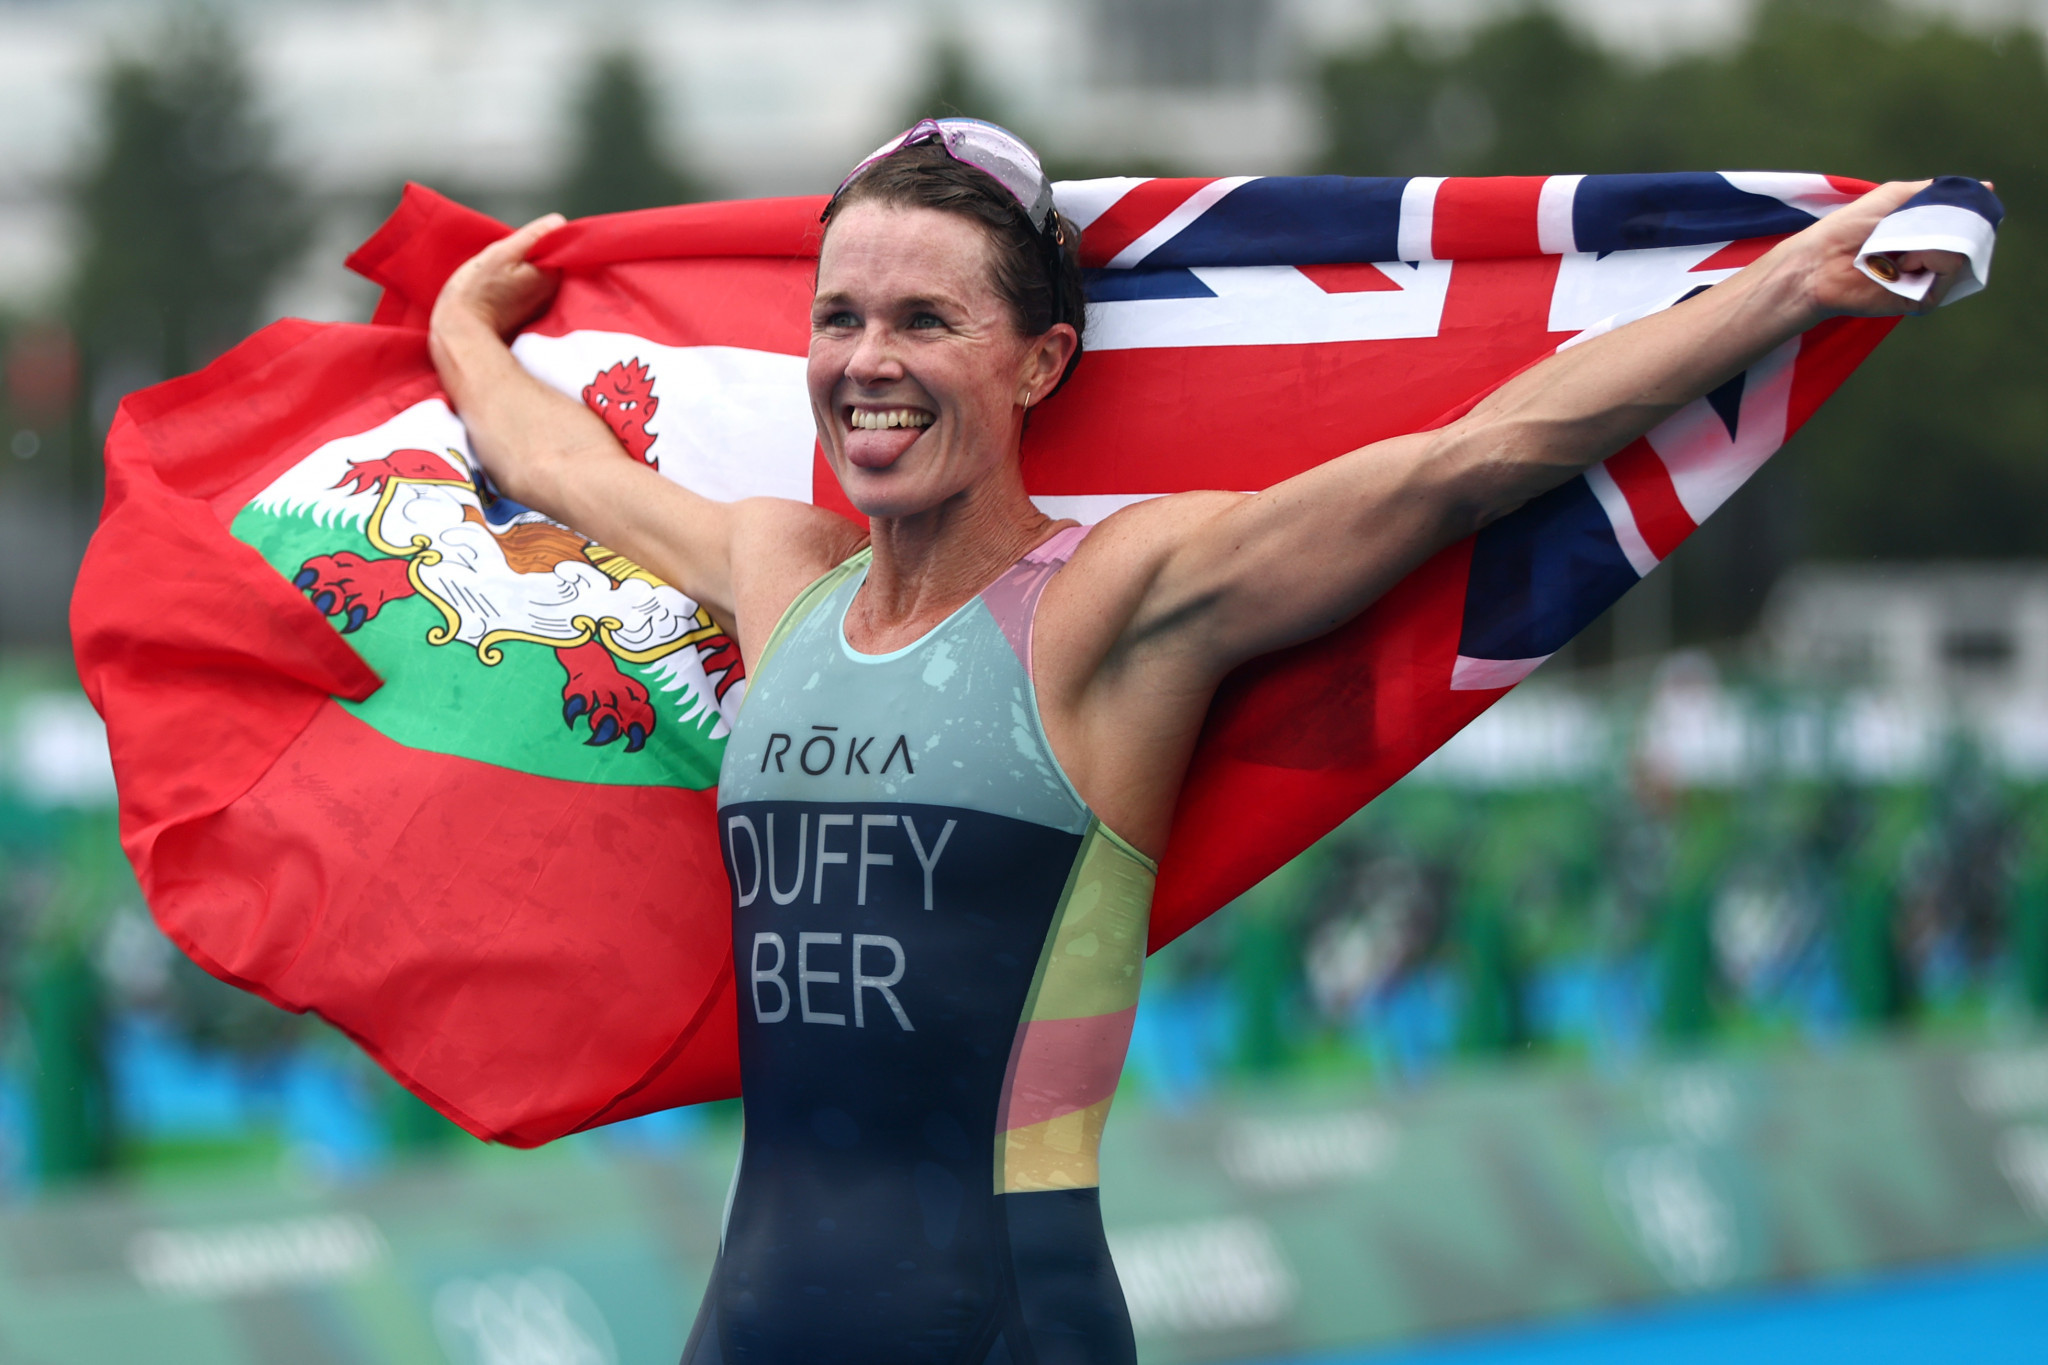 Flora Duffy became the first athlete from Bermuda to win an Olympic gold medal when she triumphed in the triathlon at Tokyo 2020 ©Getty Images